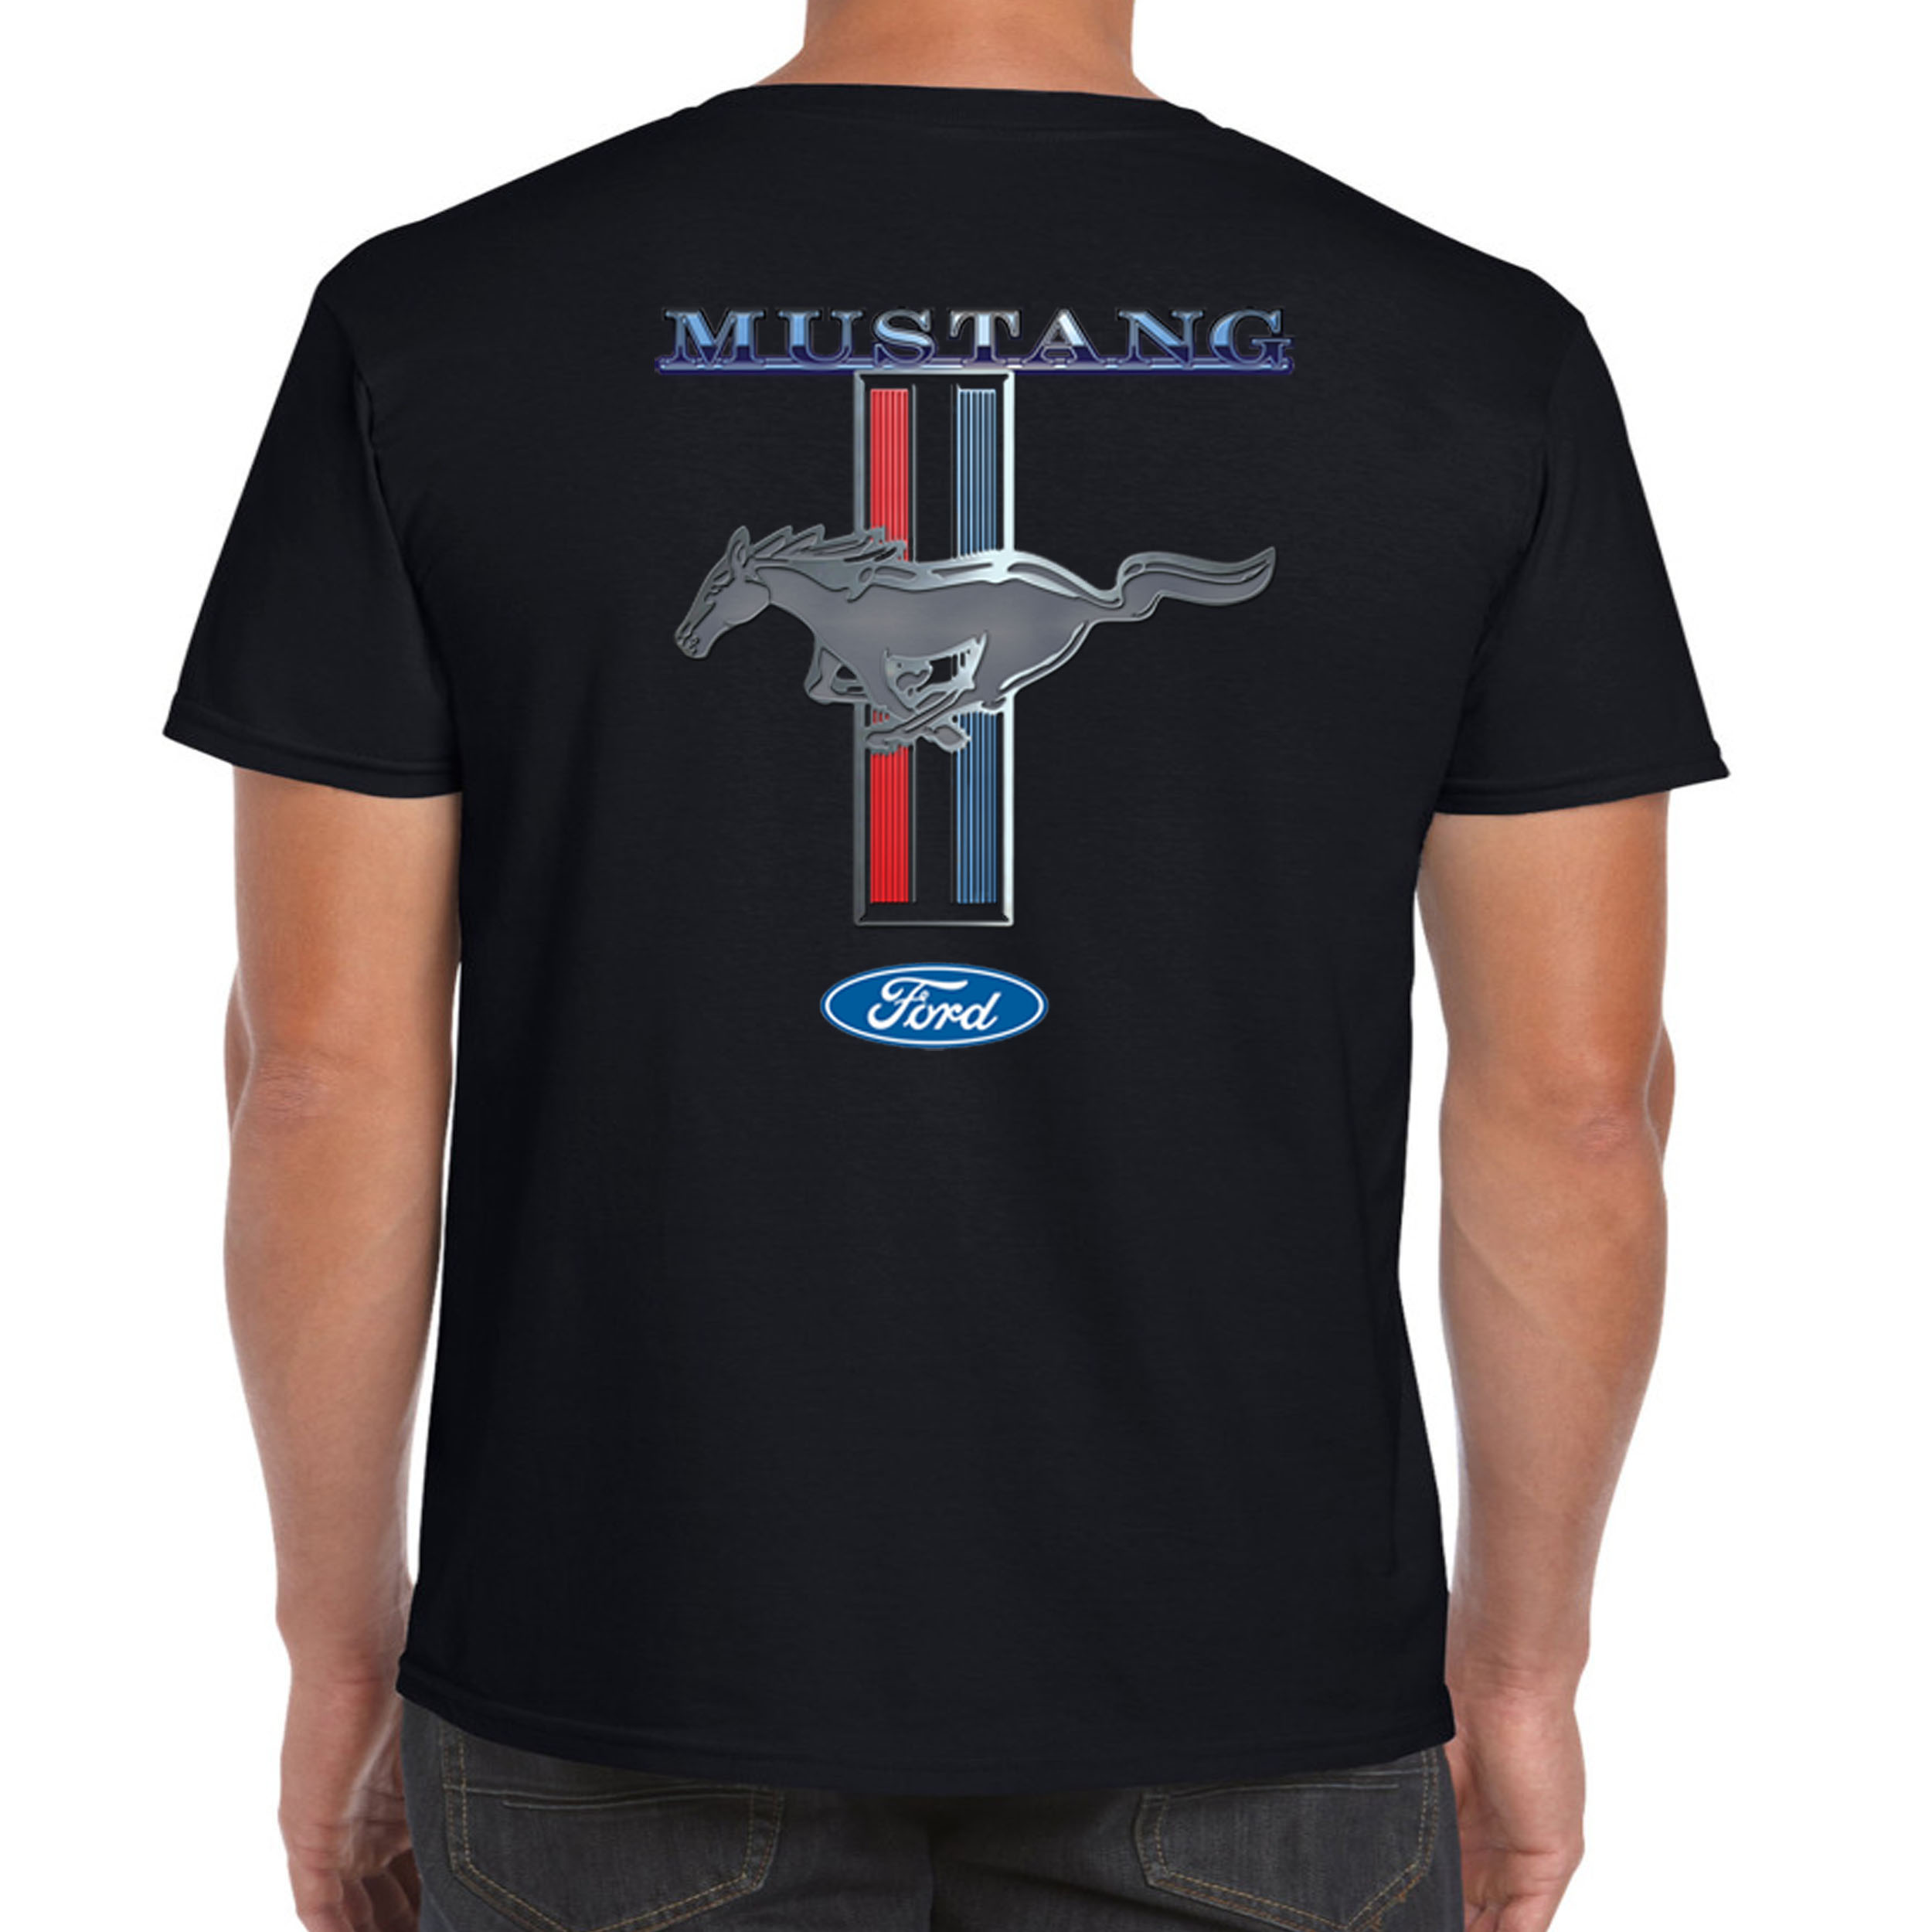 Mens Ford Mustang T Shirt Genuine Classic Vintage American Muscle Car Clothing